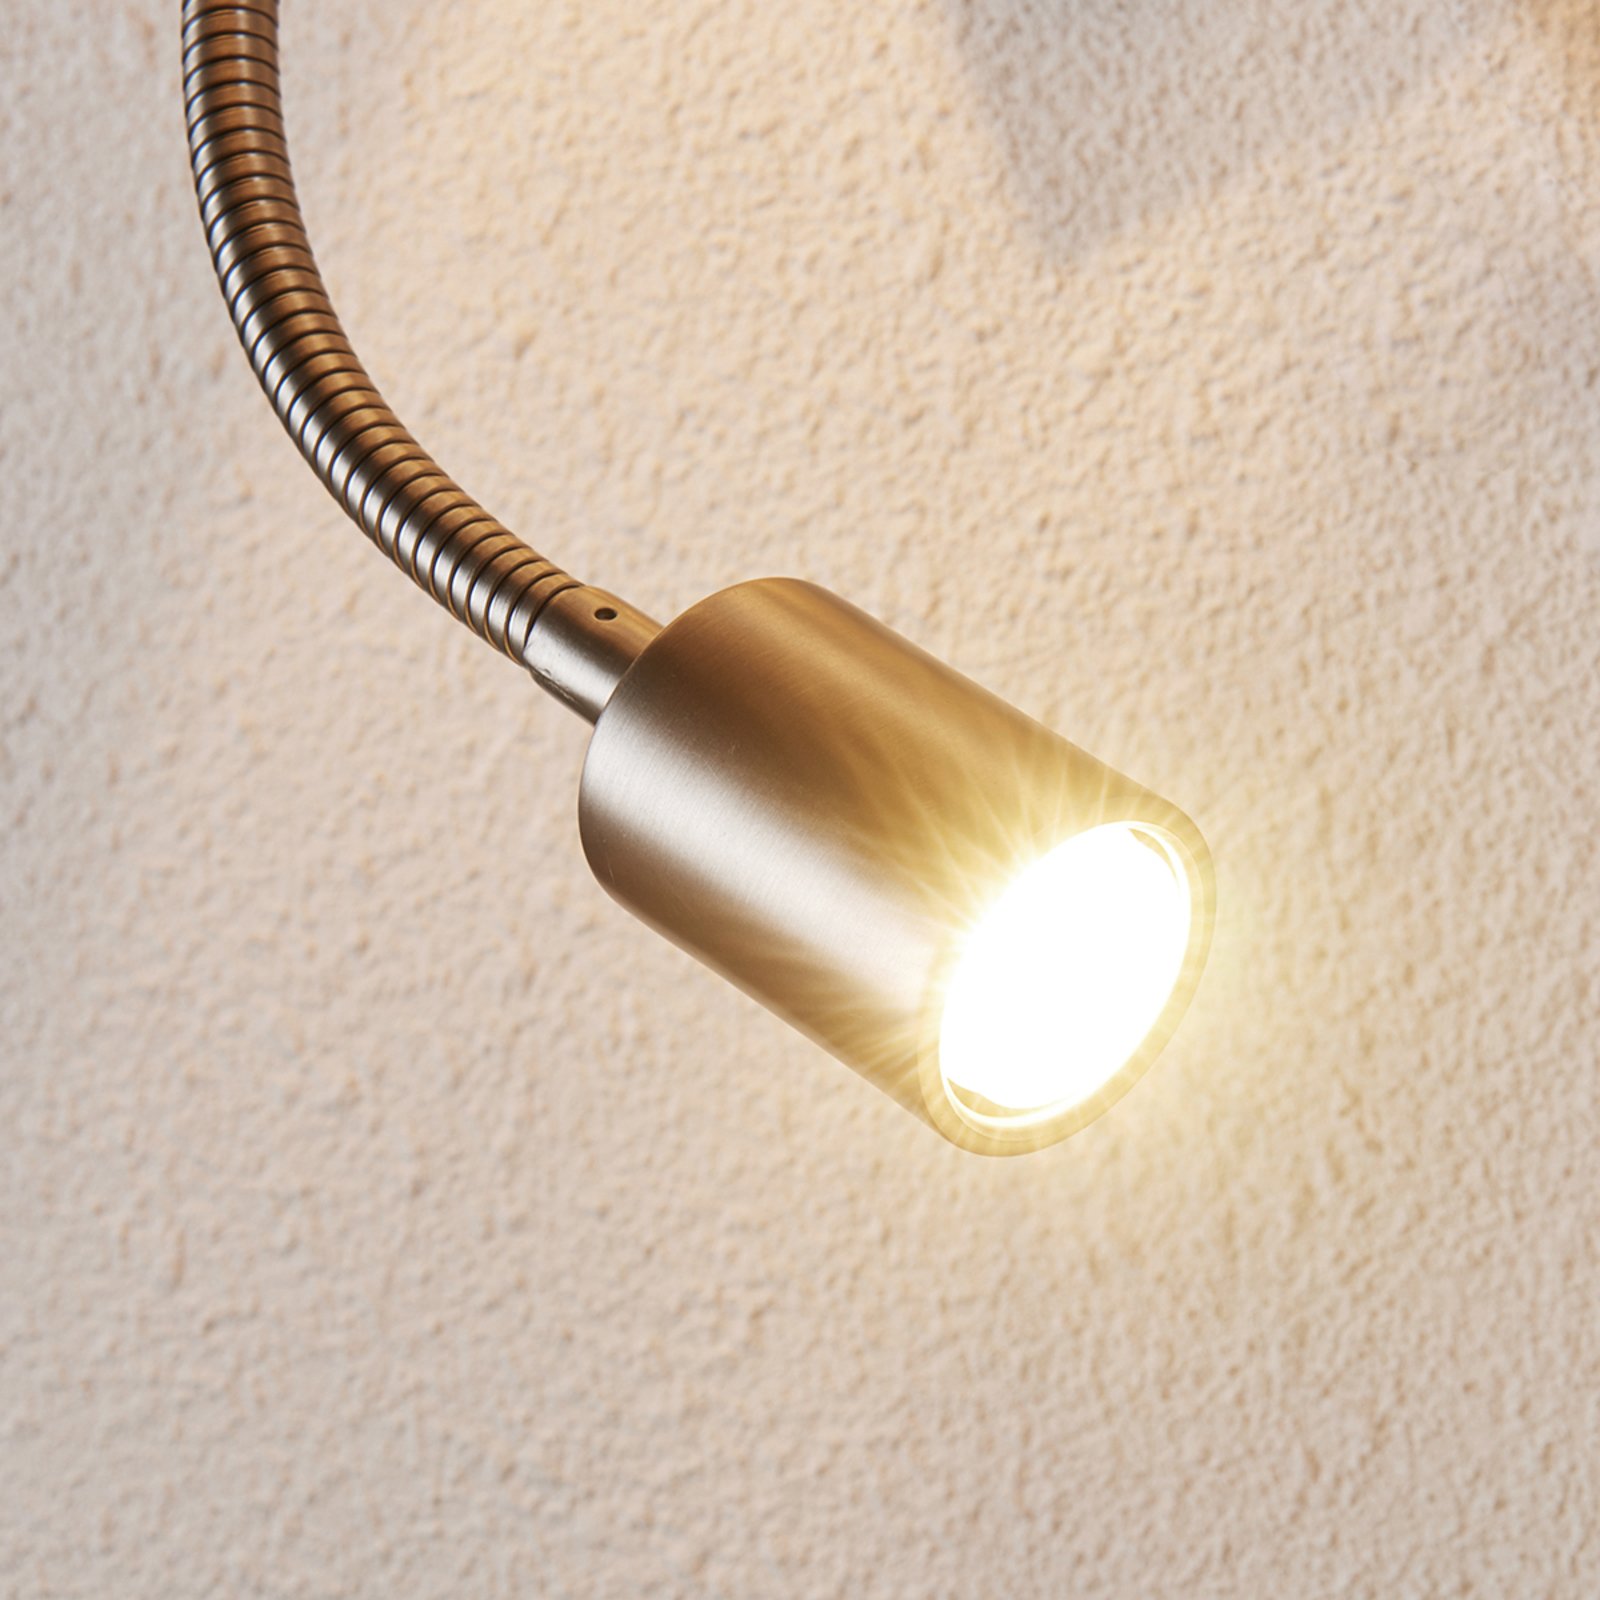 Florens - fabric wall lamp with LED reading light